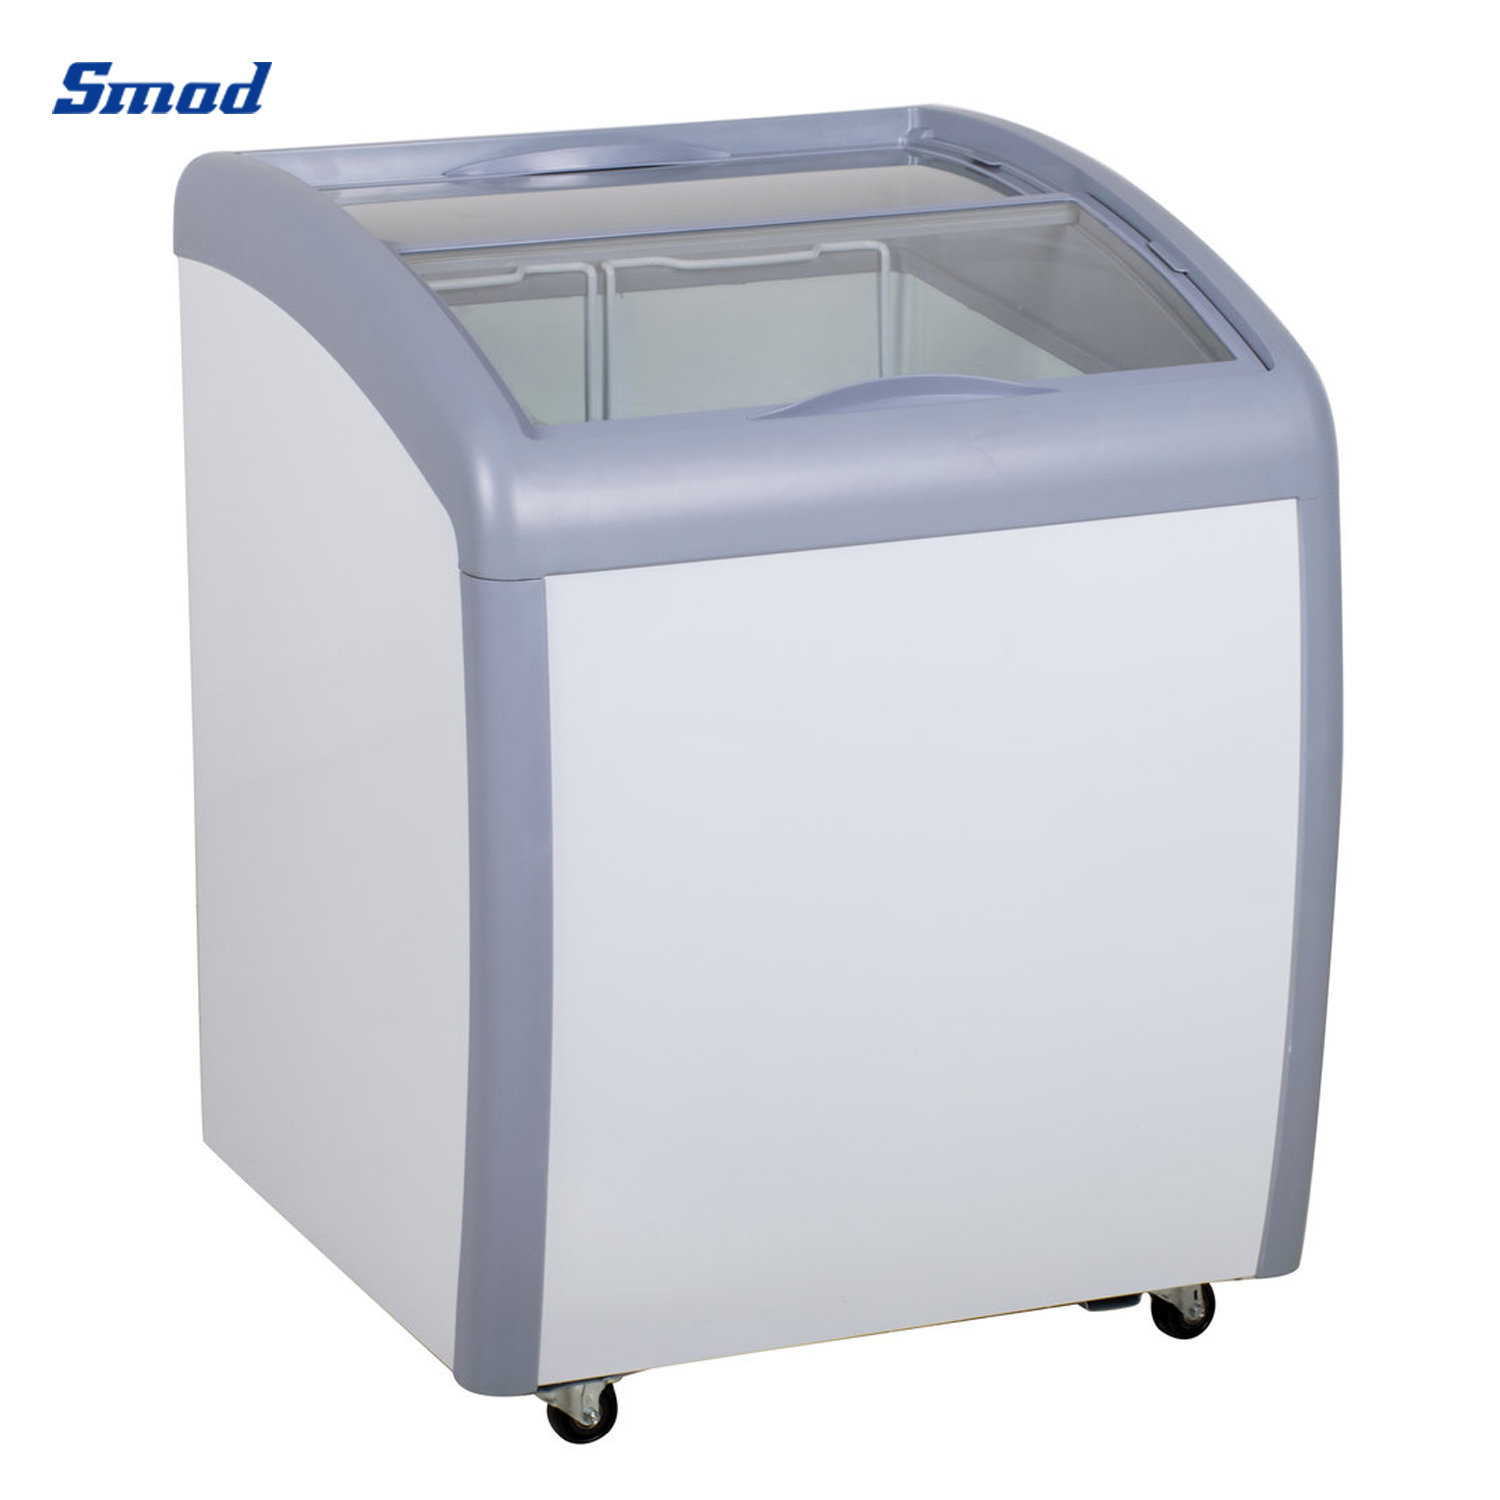 
Smad Glass Top Ice Cream Deep Freezer with Defrost tube